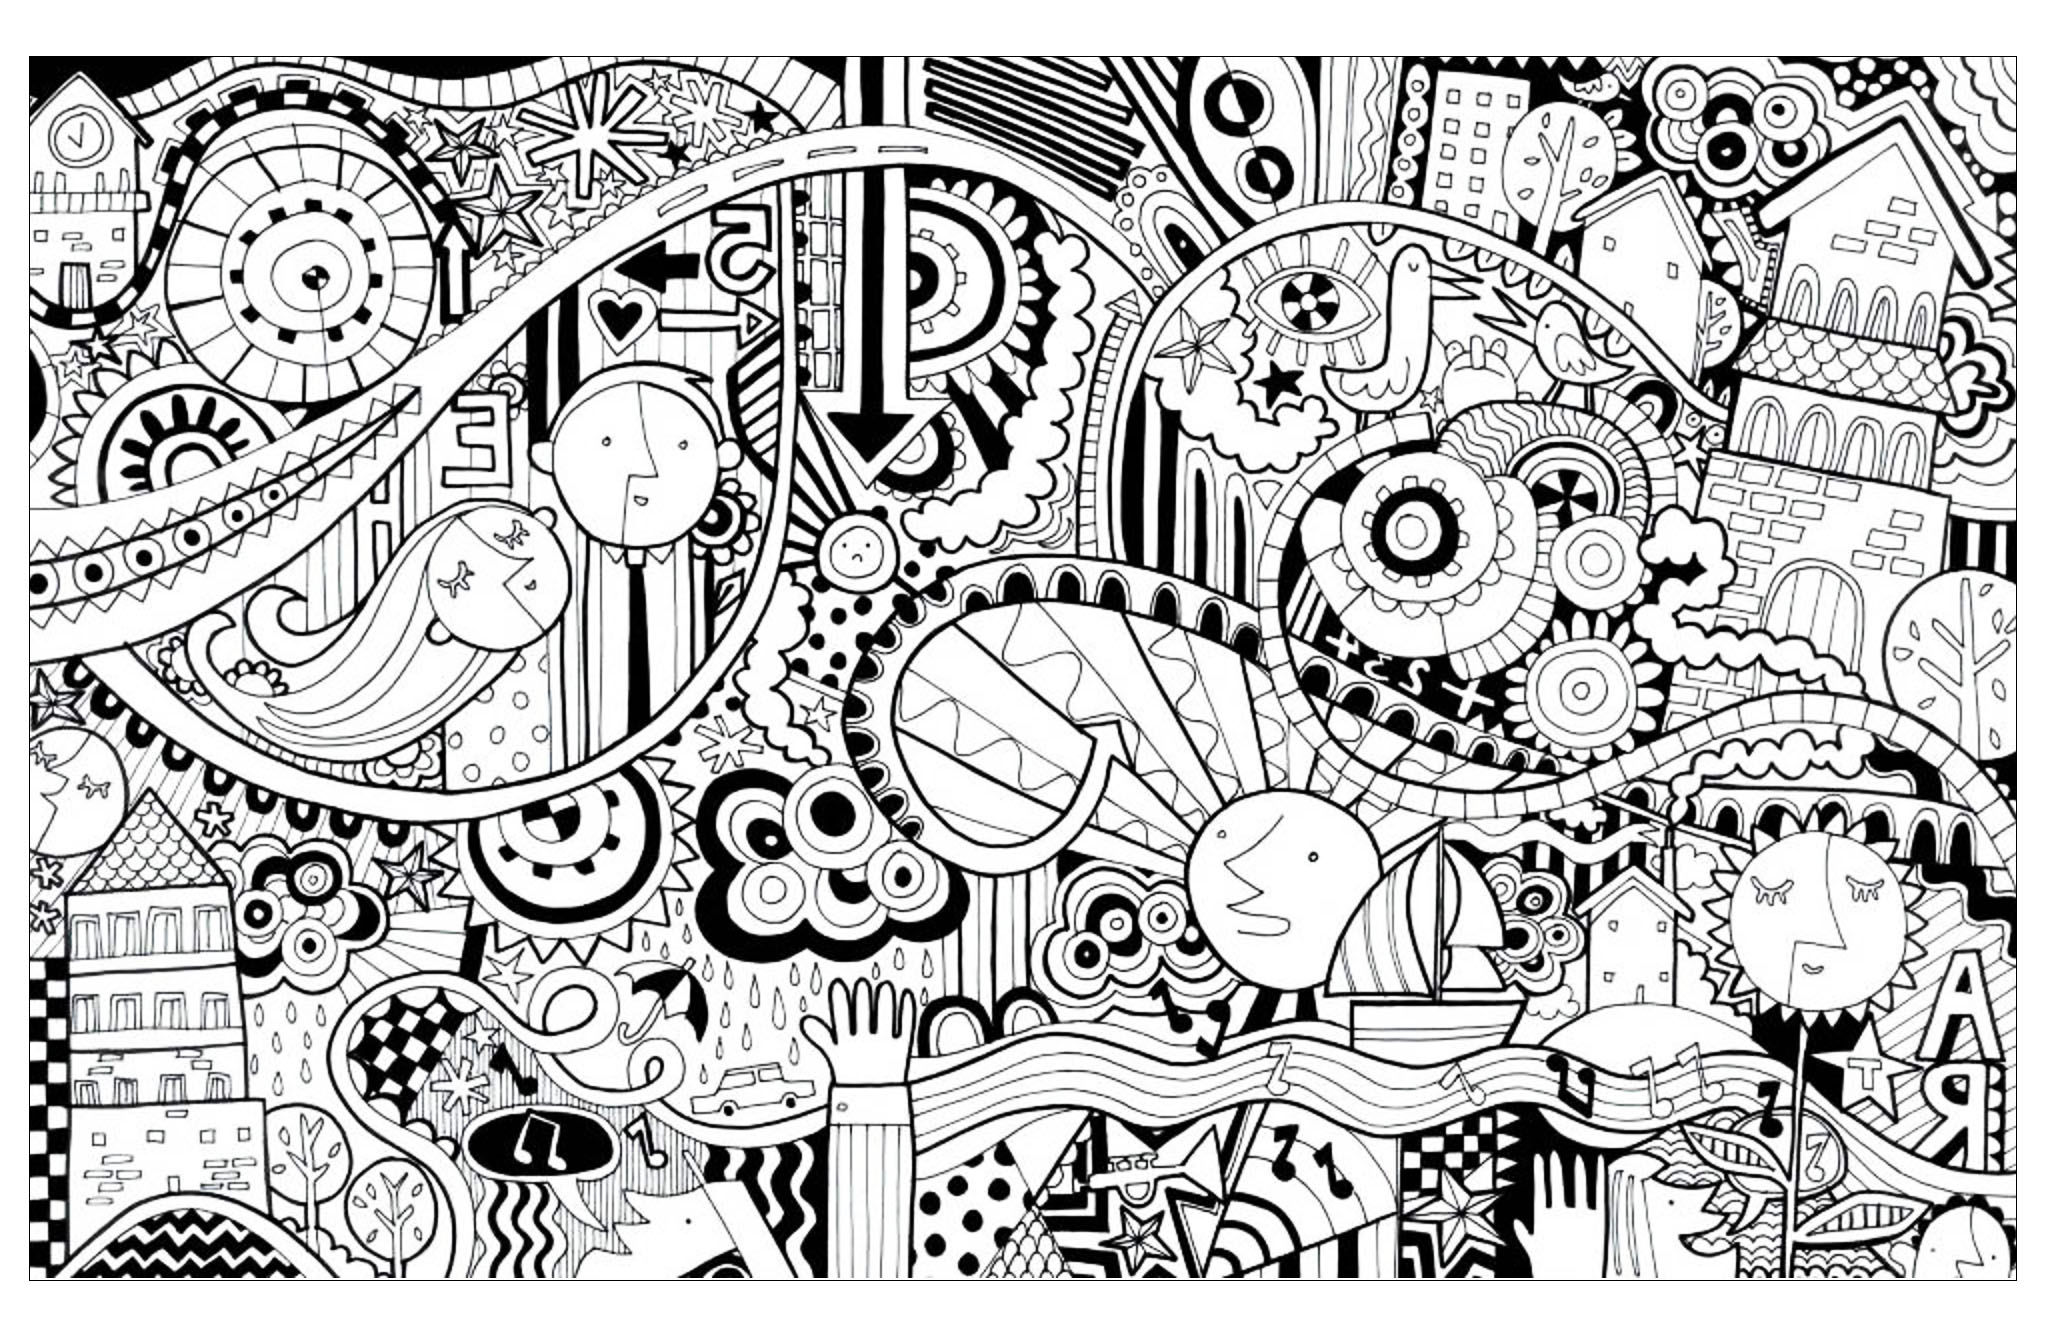 Funny Doodle  City Doodle  Art  Doodling  Adult Coloring  Pages